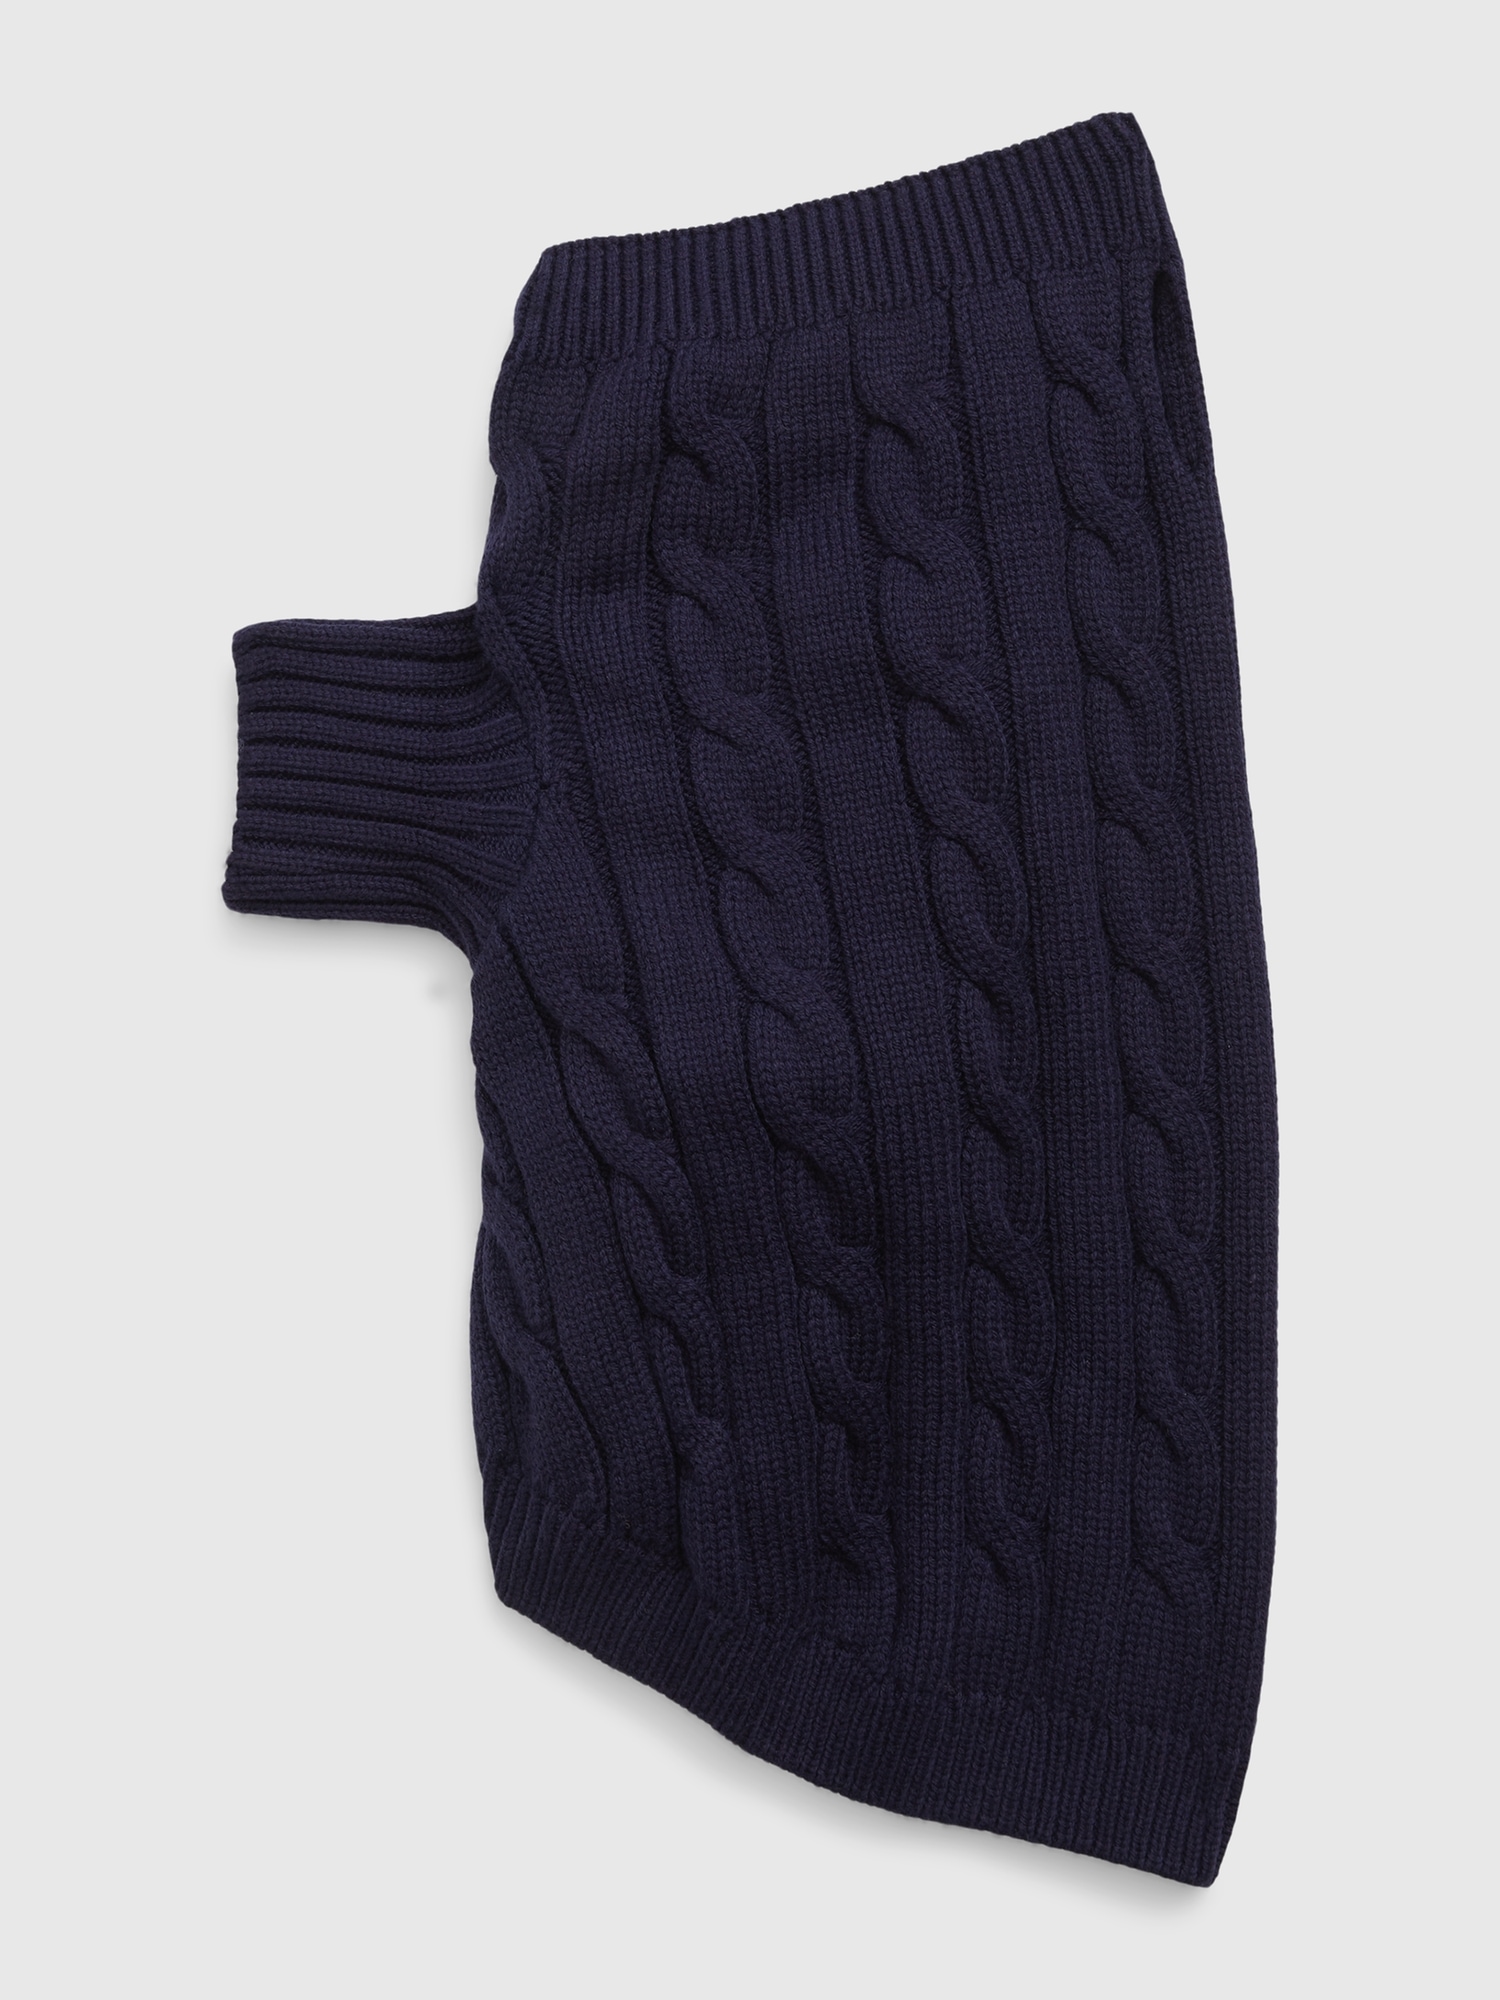 Gap Cable-Knit Dog Sweater